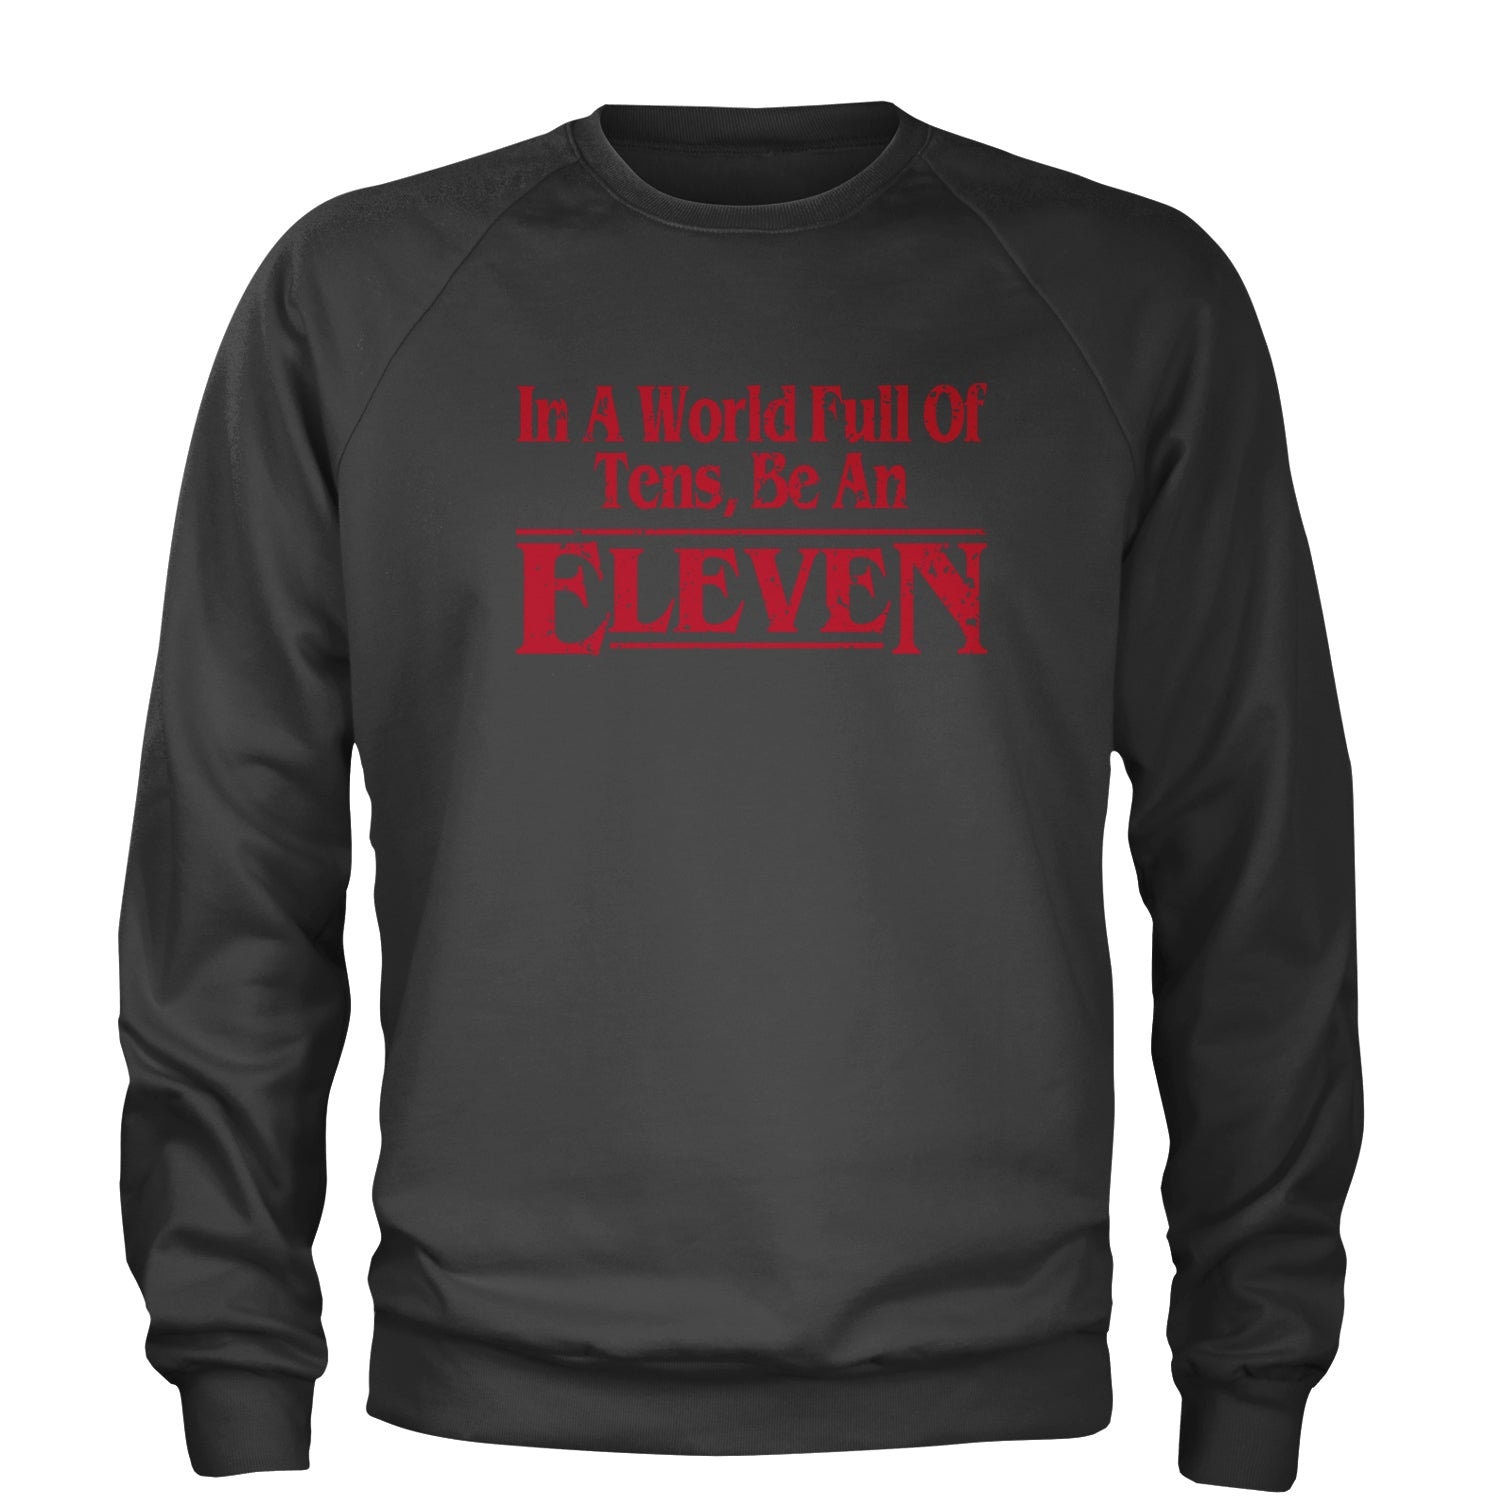 In A World Full of Tens Be an Eleven Adult Crewneck - Etsy